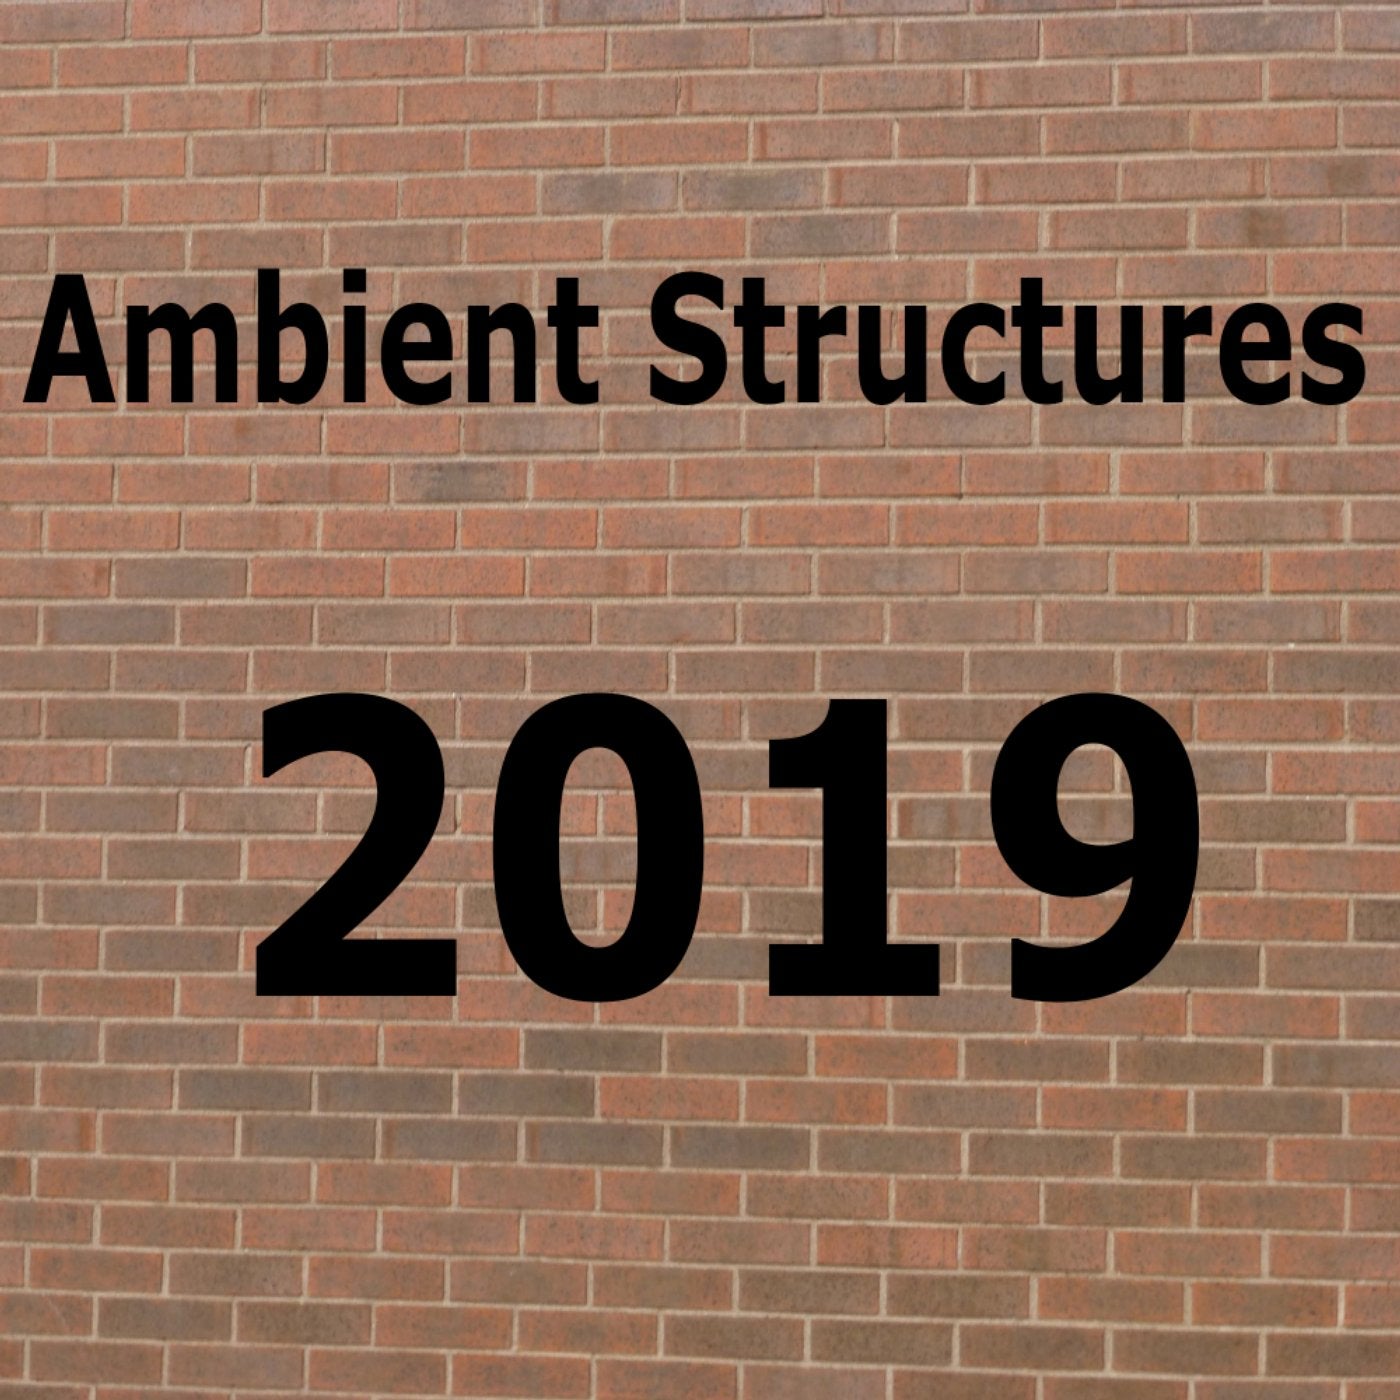 Ambient Structures 2019